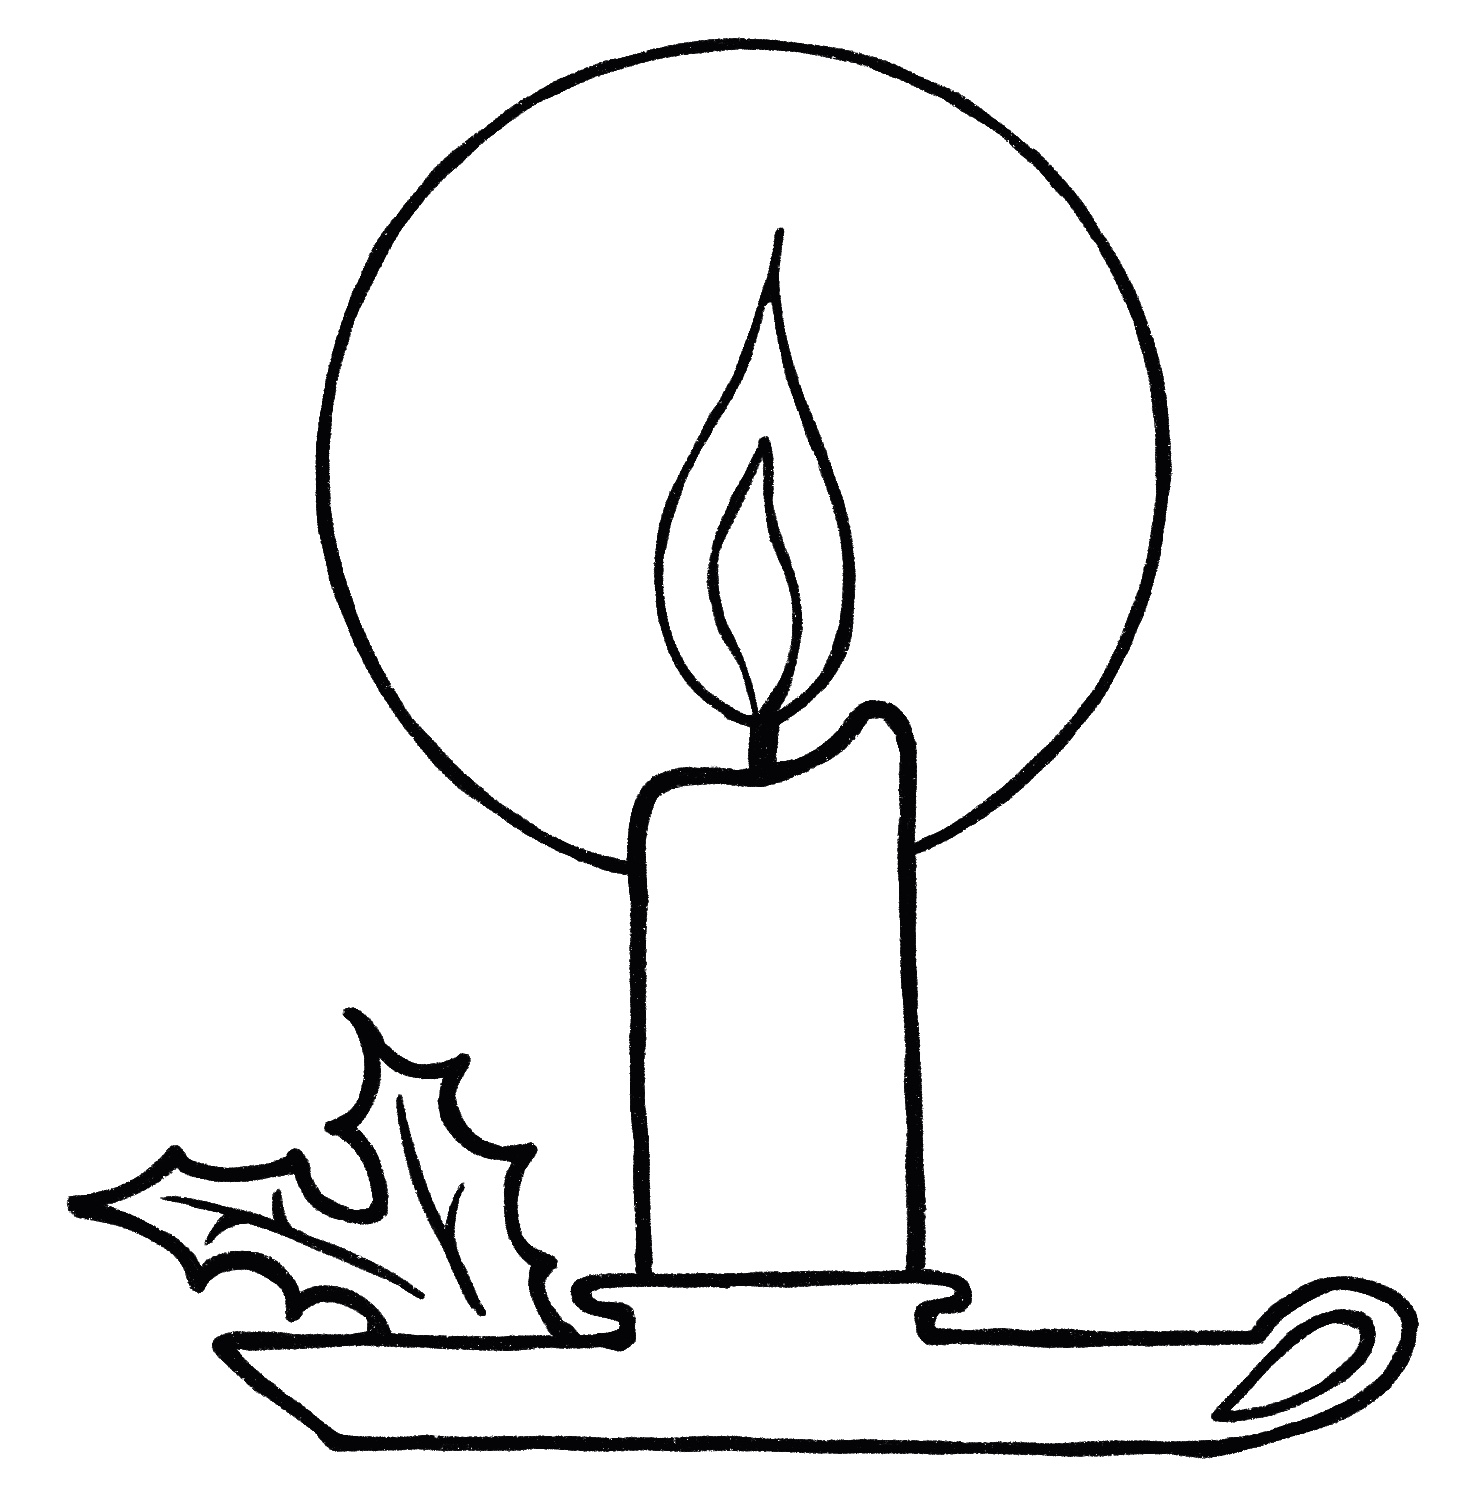 How to Draw a Candle  Design School